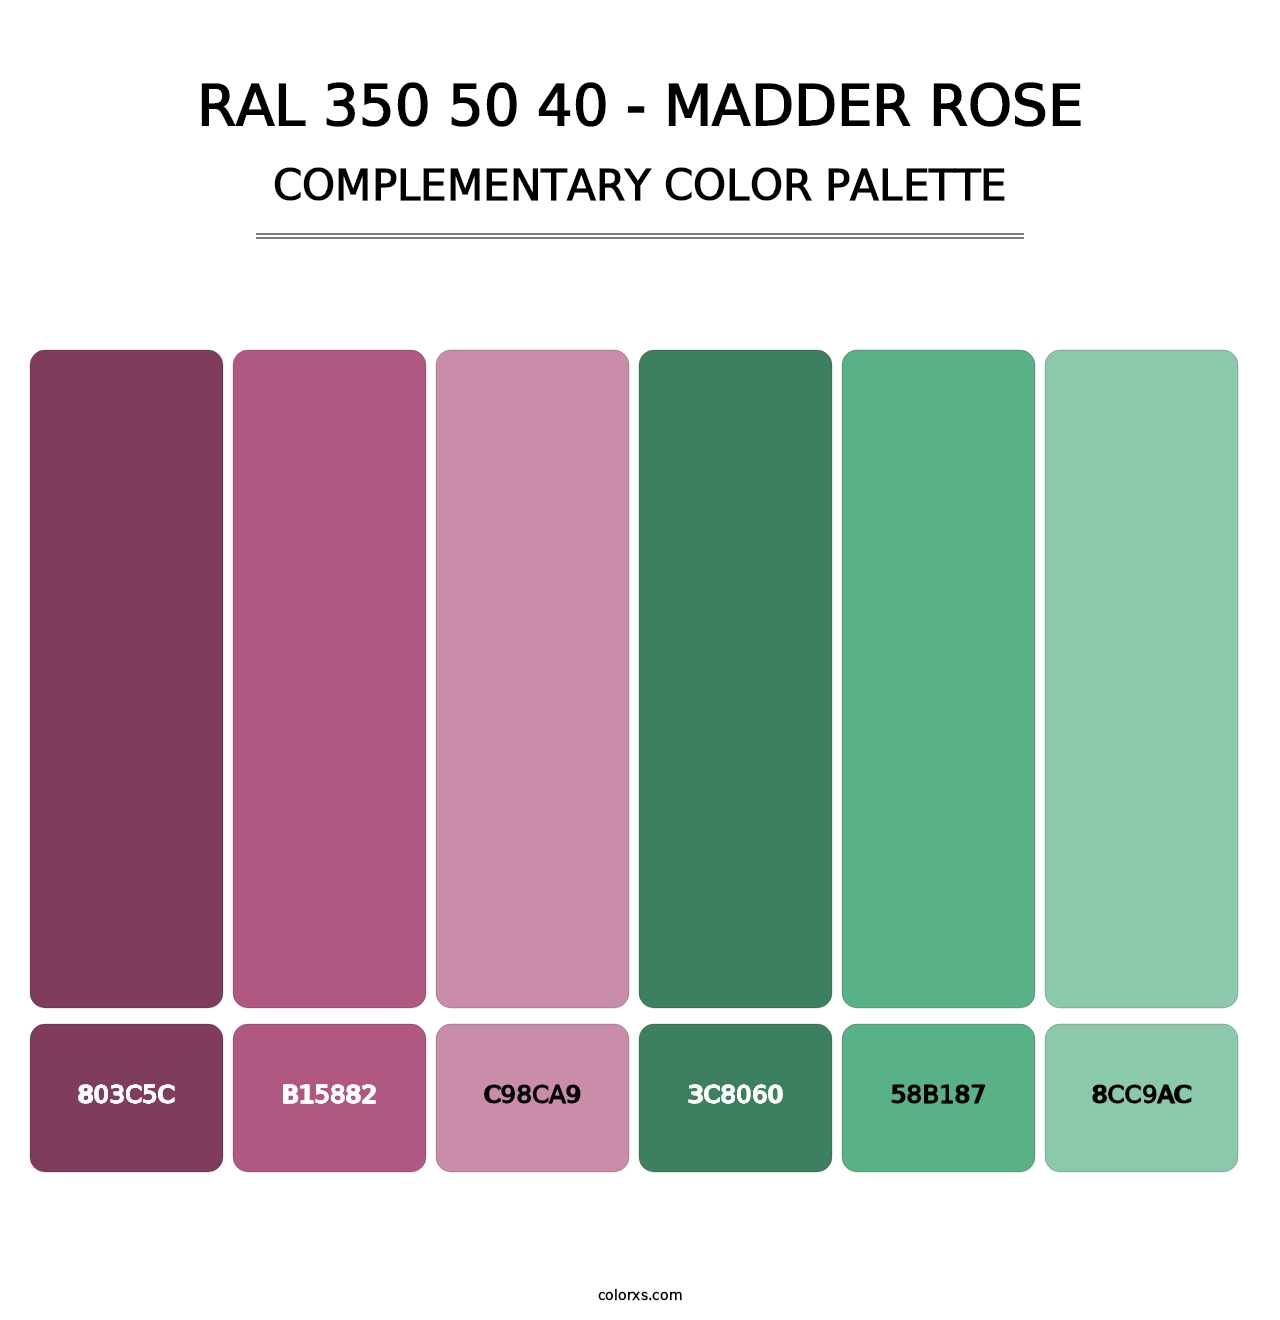 RAL 350 50 40 - Madder Rose - Complementary Color Palette